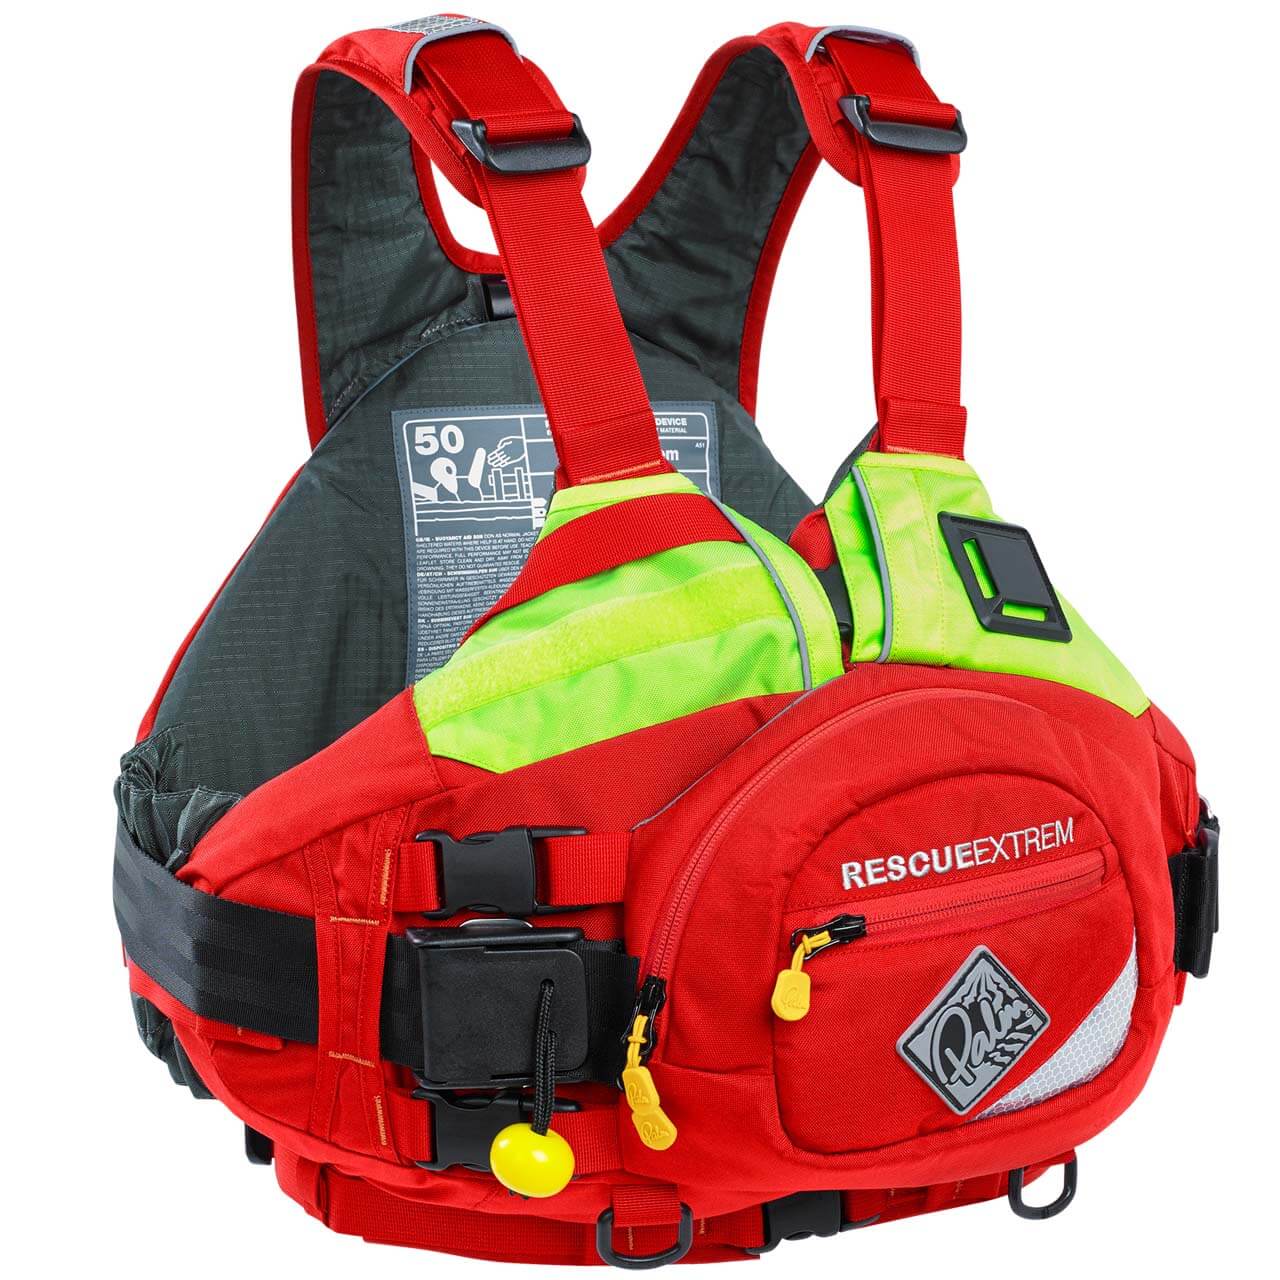 Palm Rescue Extrem Schwimmweste - Red , XS/S  (60 N)